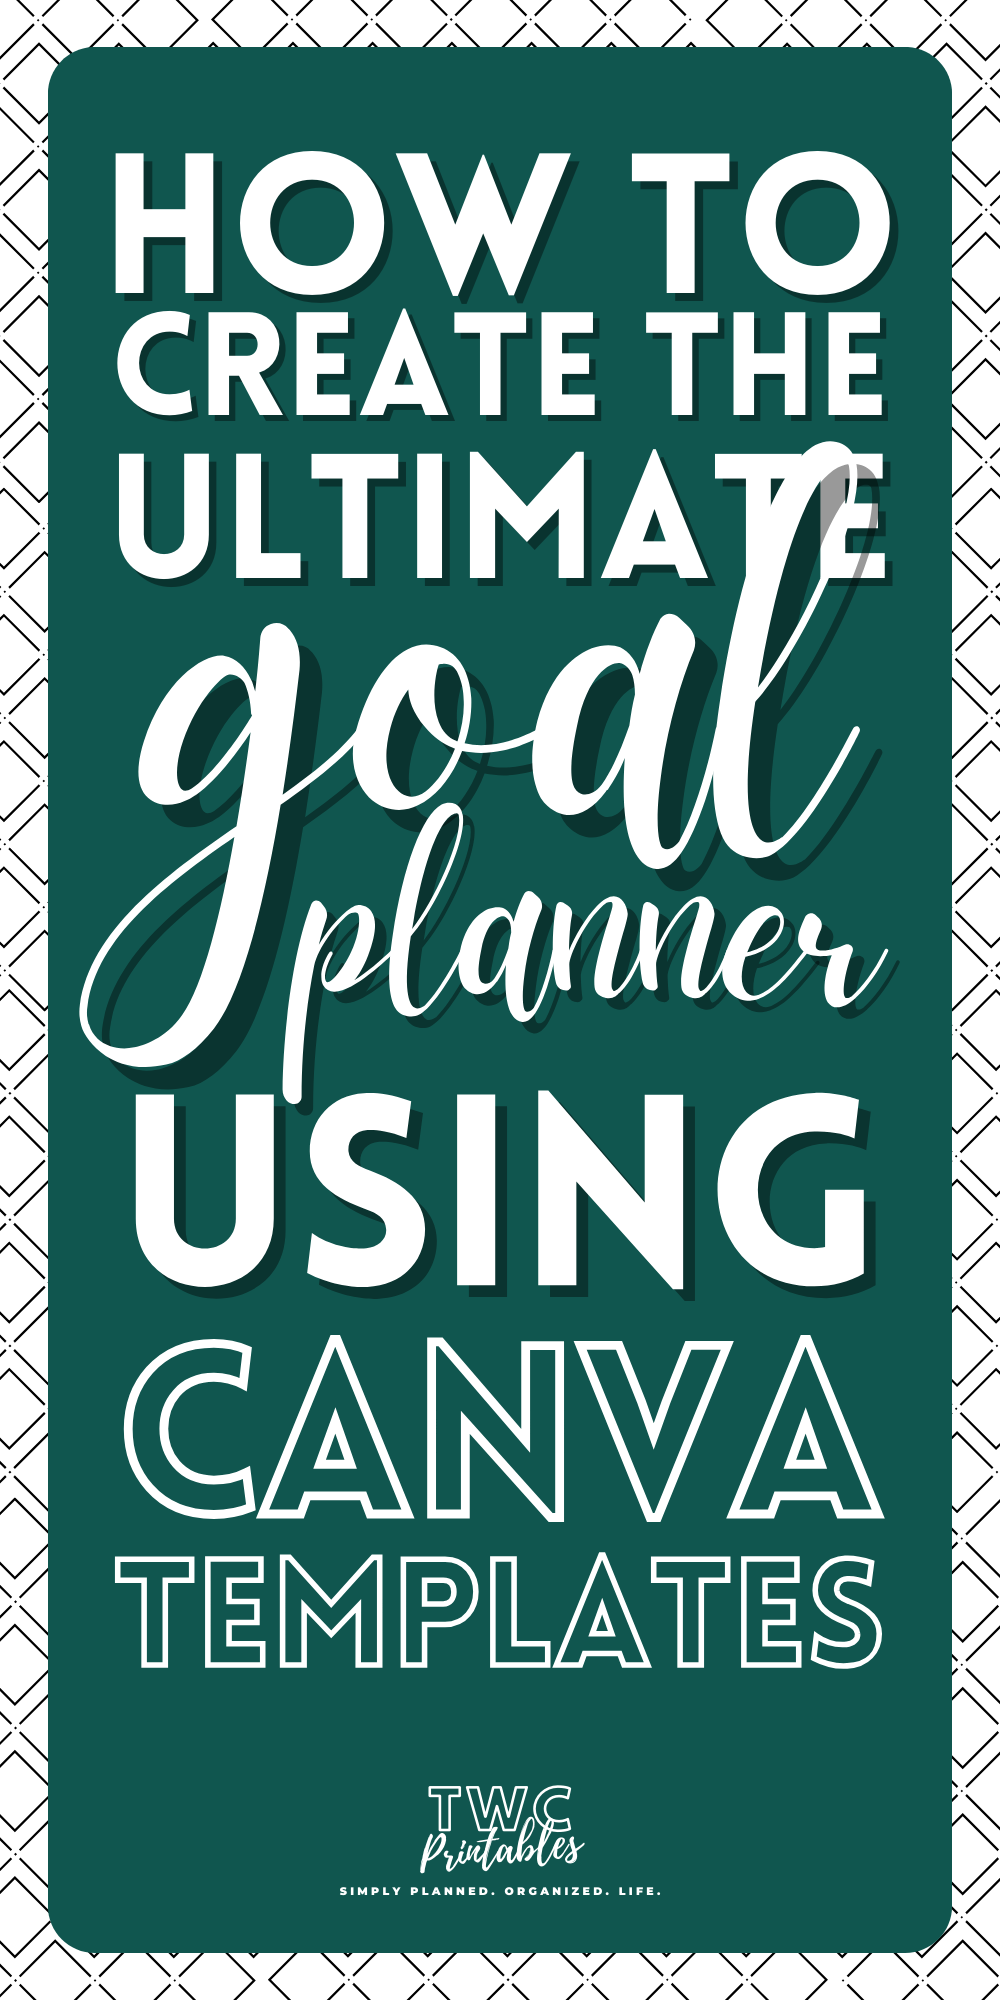 How to create the ultimate goal planner using Canva templates